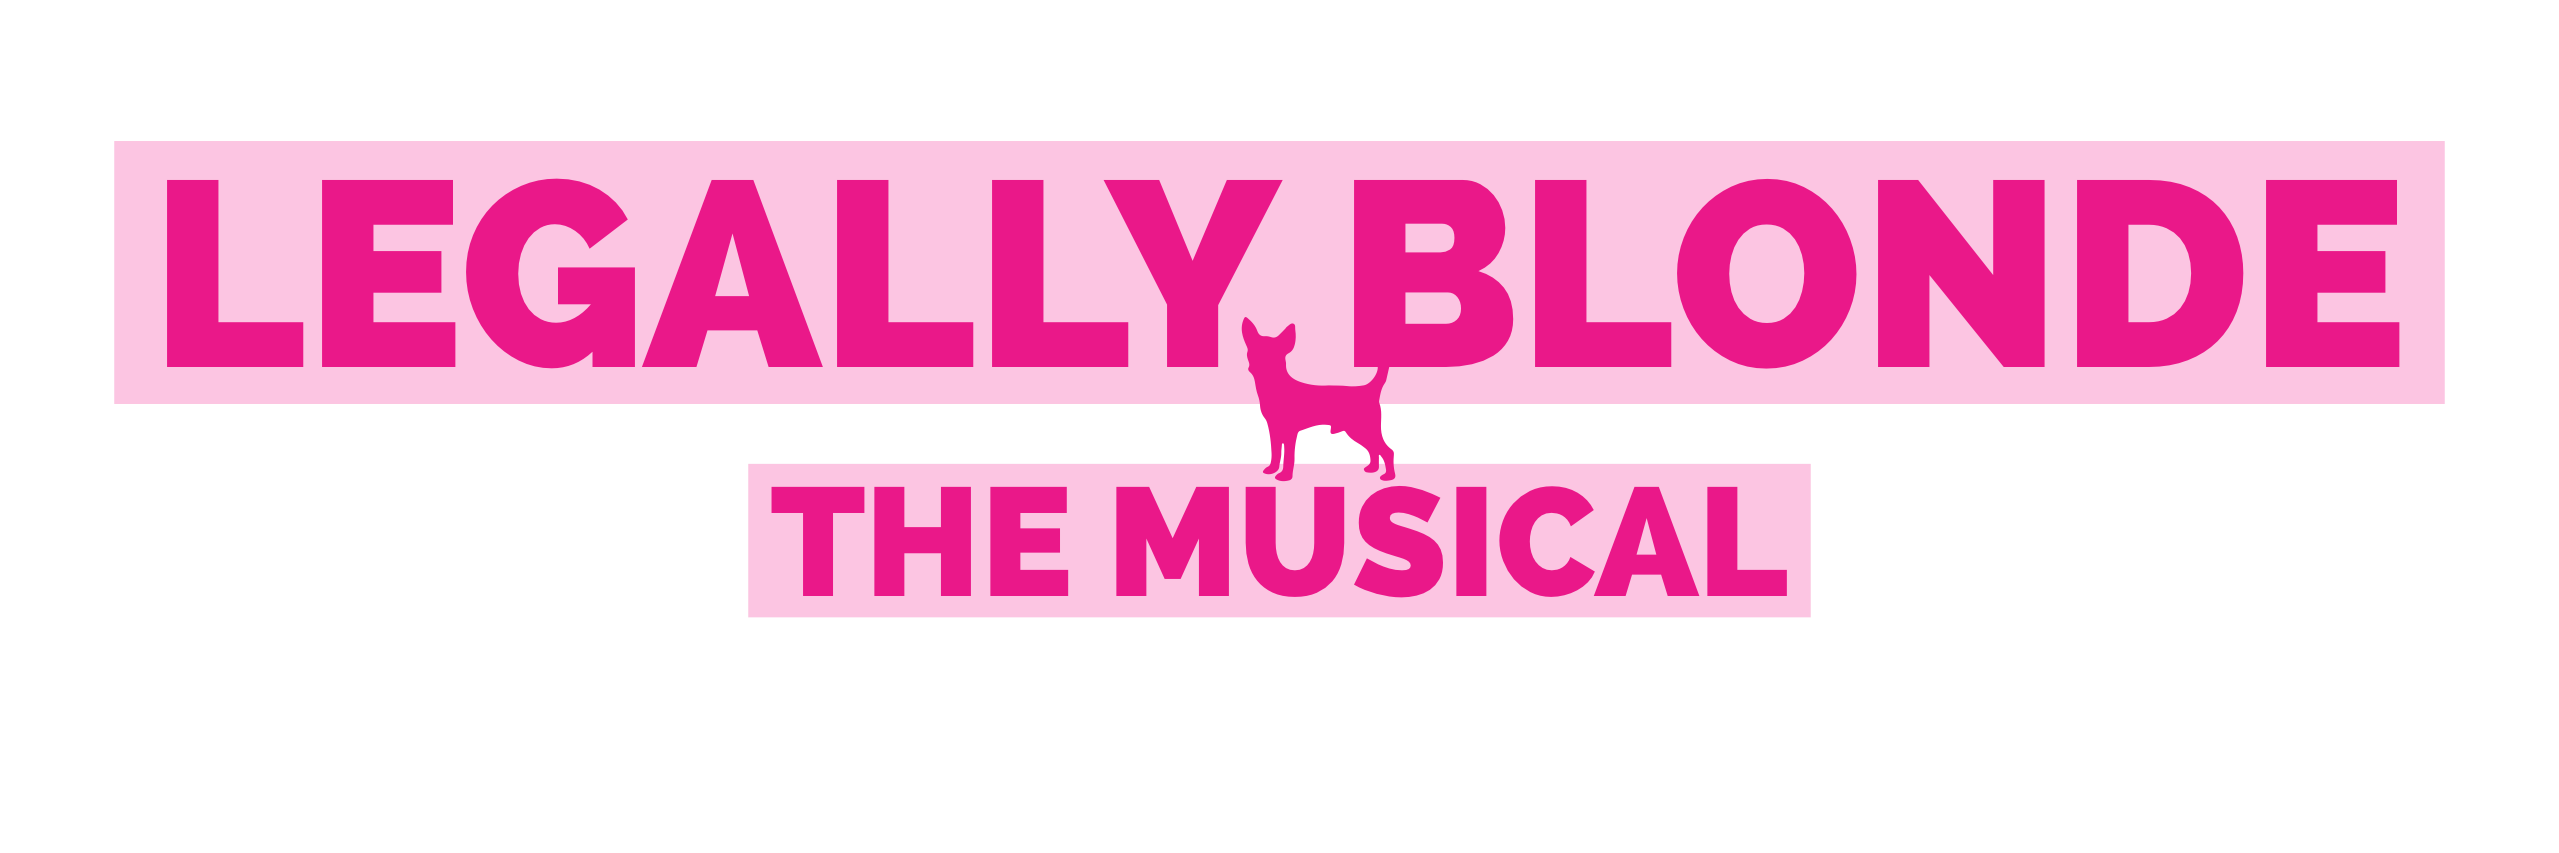 Legally Blonde the musical